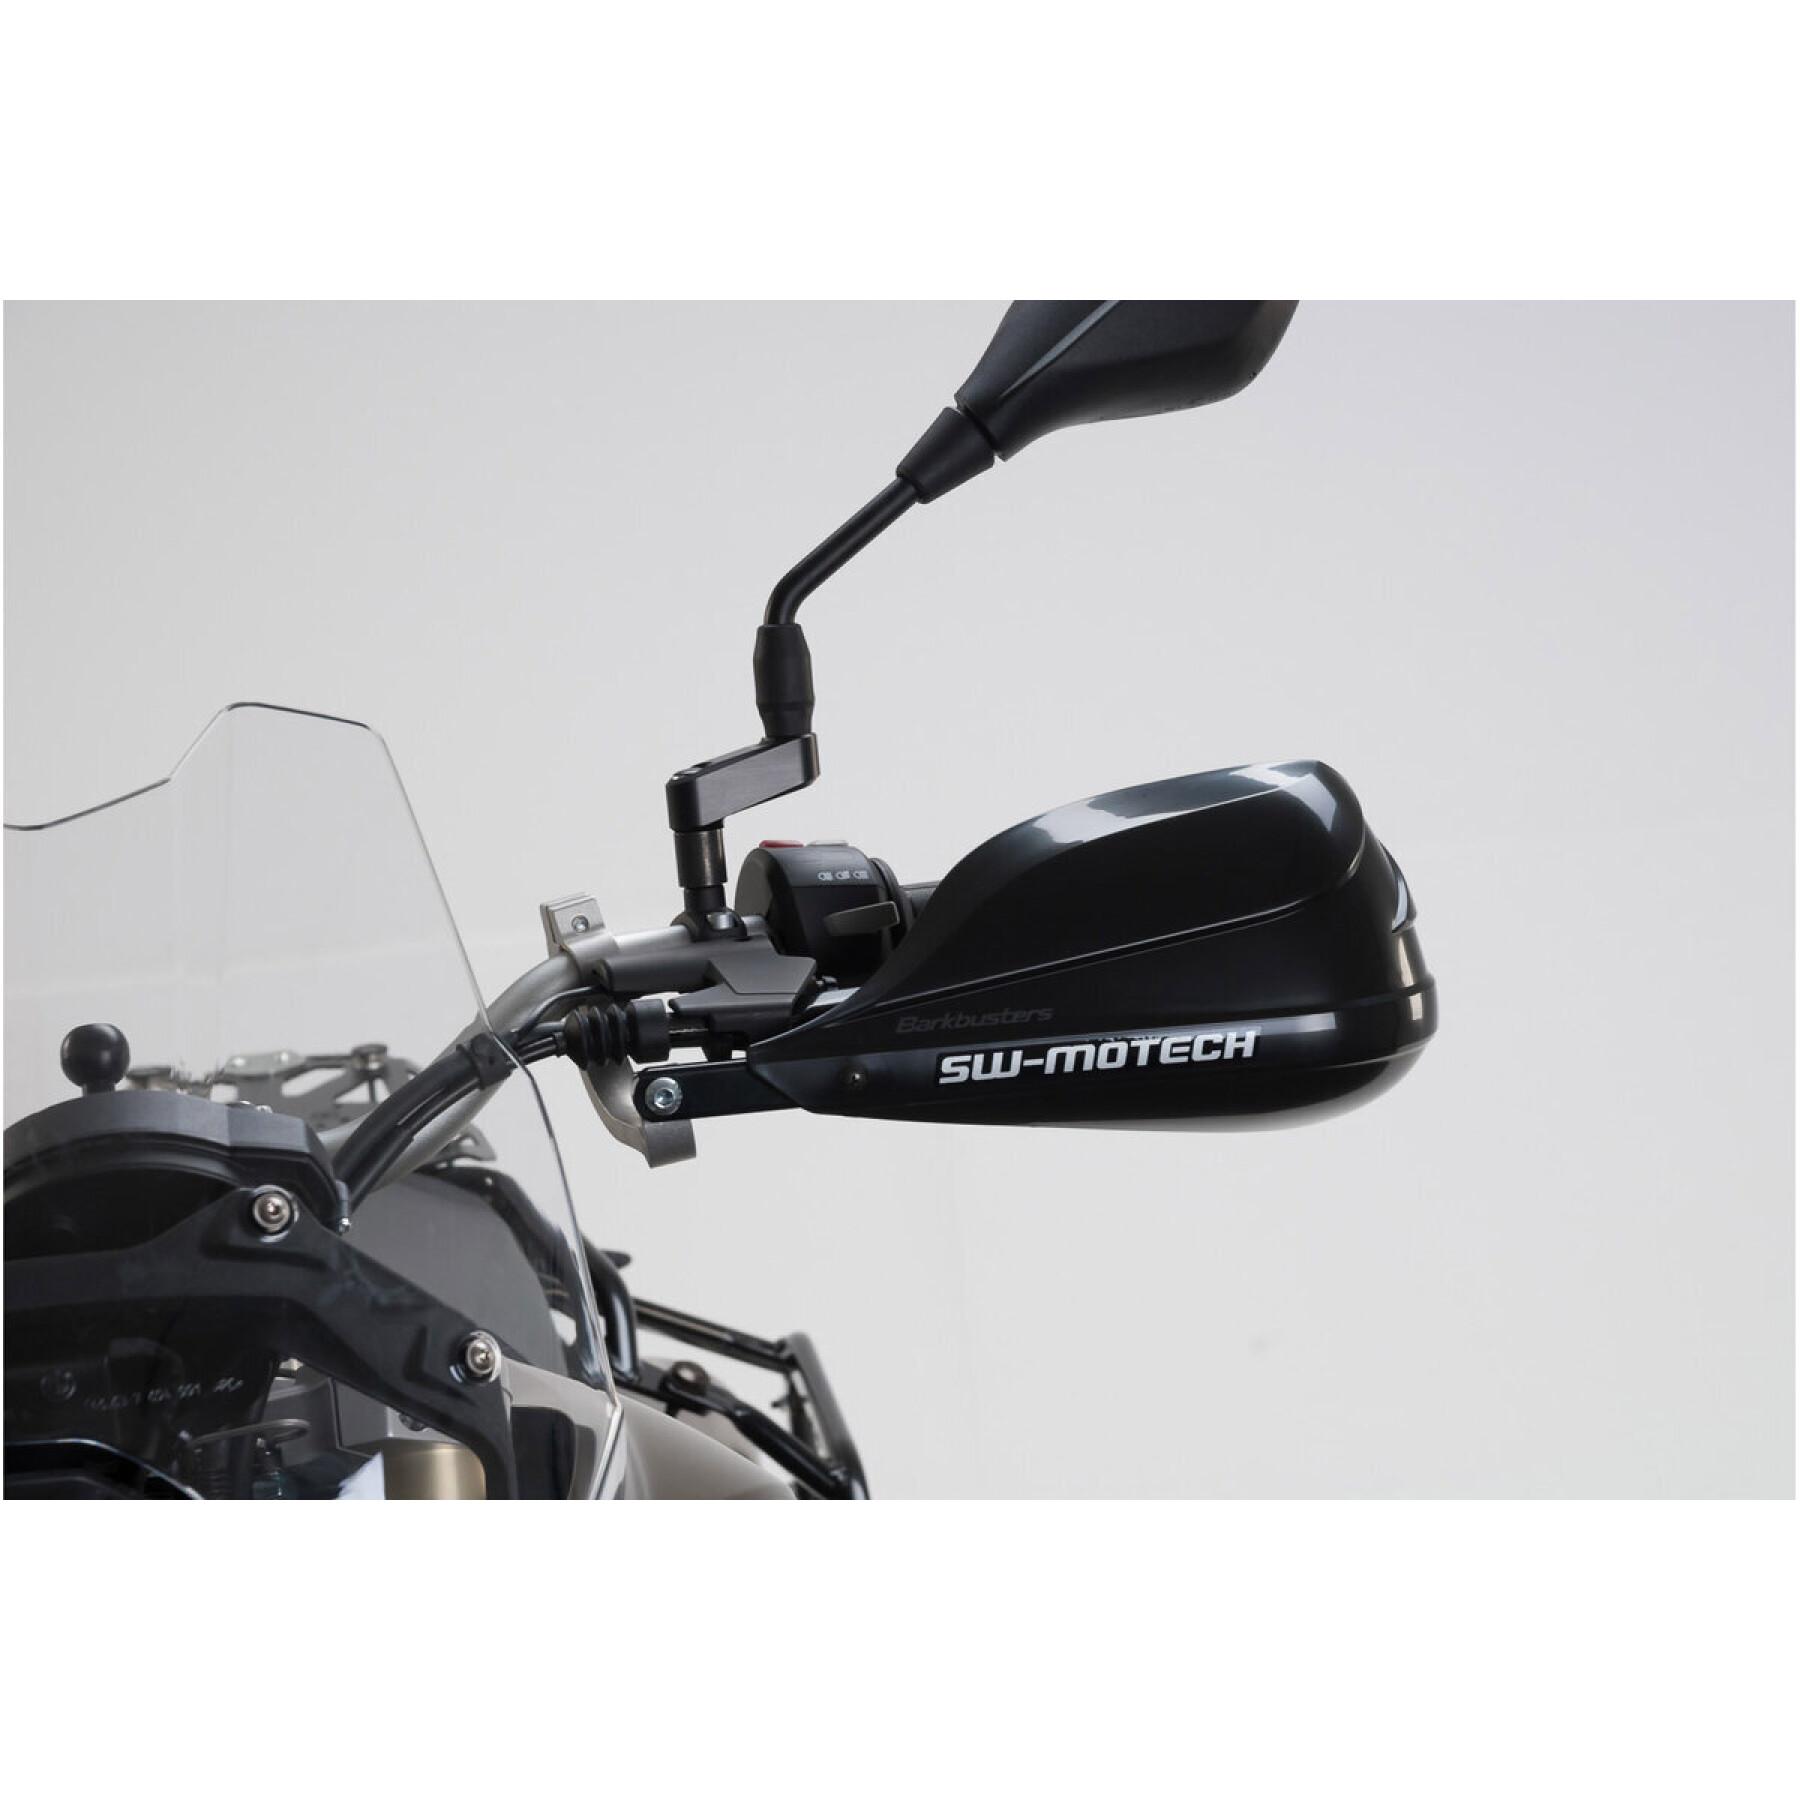 Handguard kit for all motorcycles SW-Motech Bbstorm